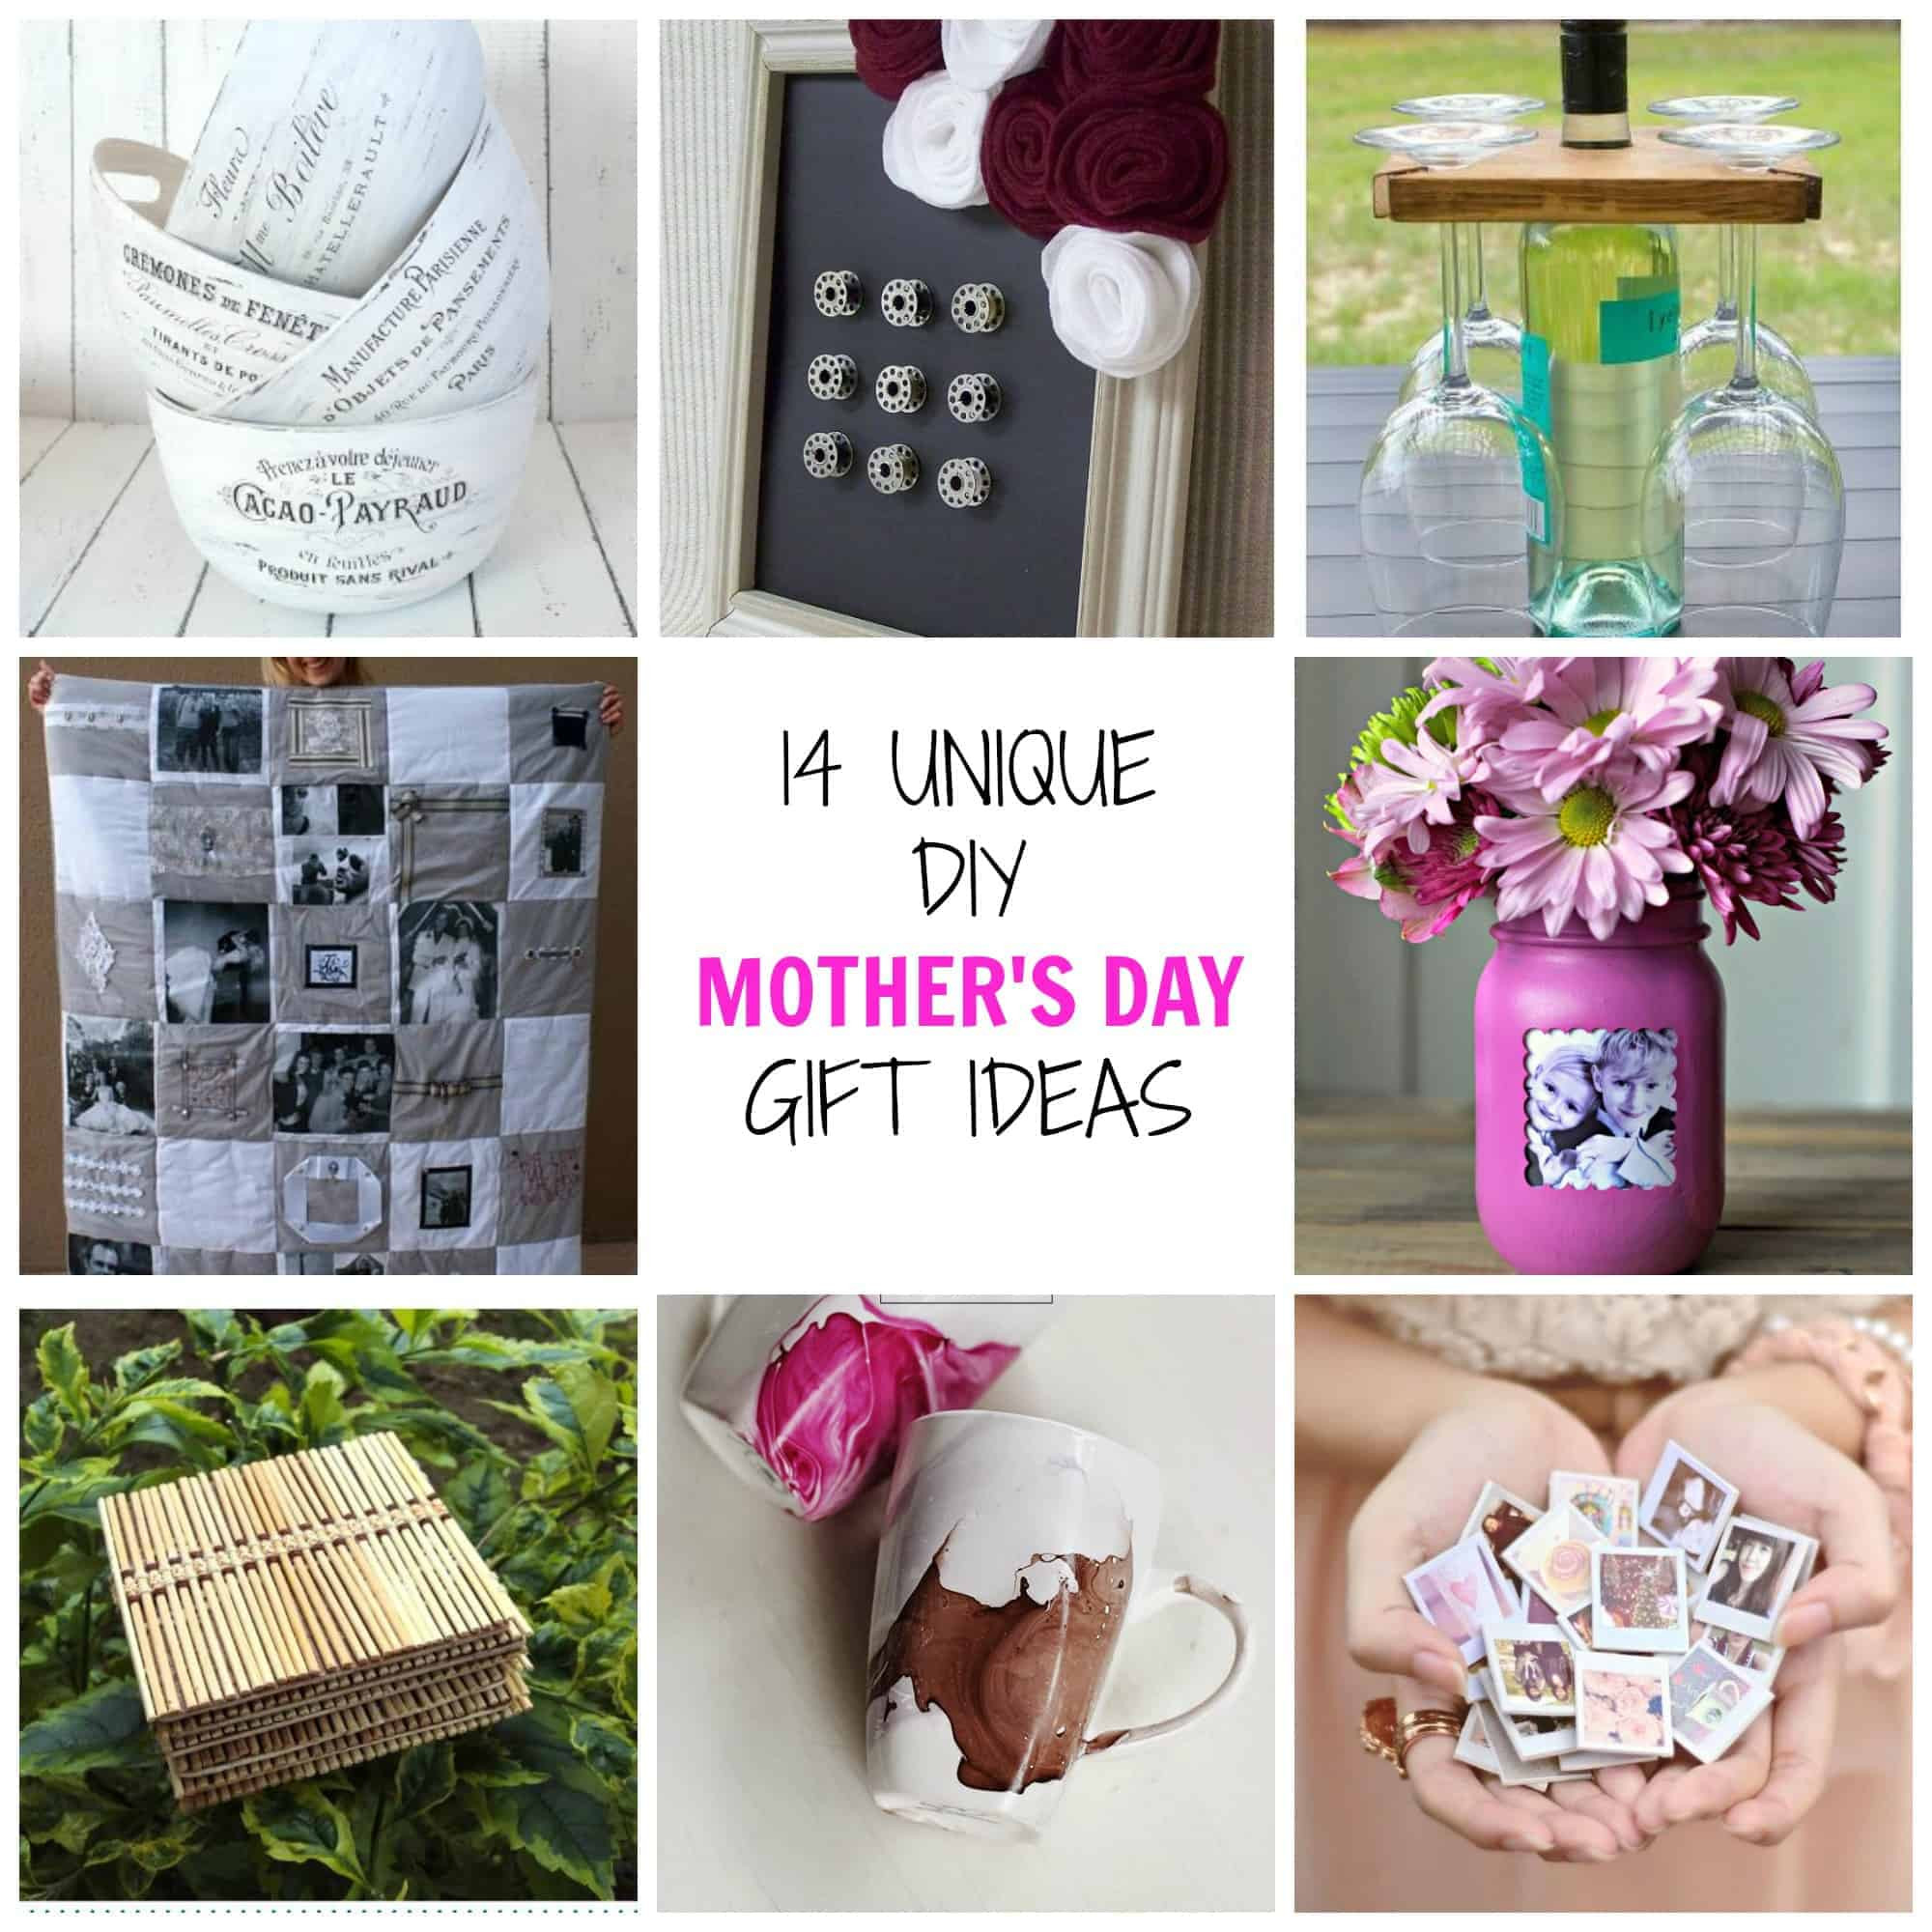 Unique Mother'S Day Gift Ideas
 14 Unique DIY Mother s Day Gifts Simplify Create Inspire